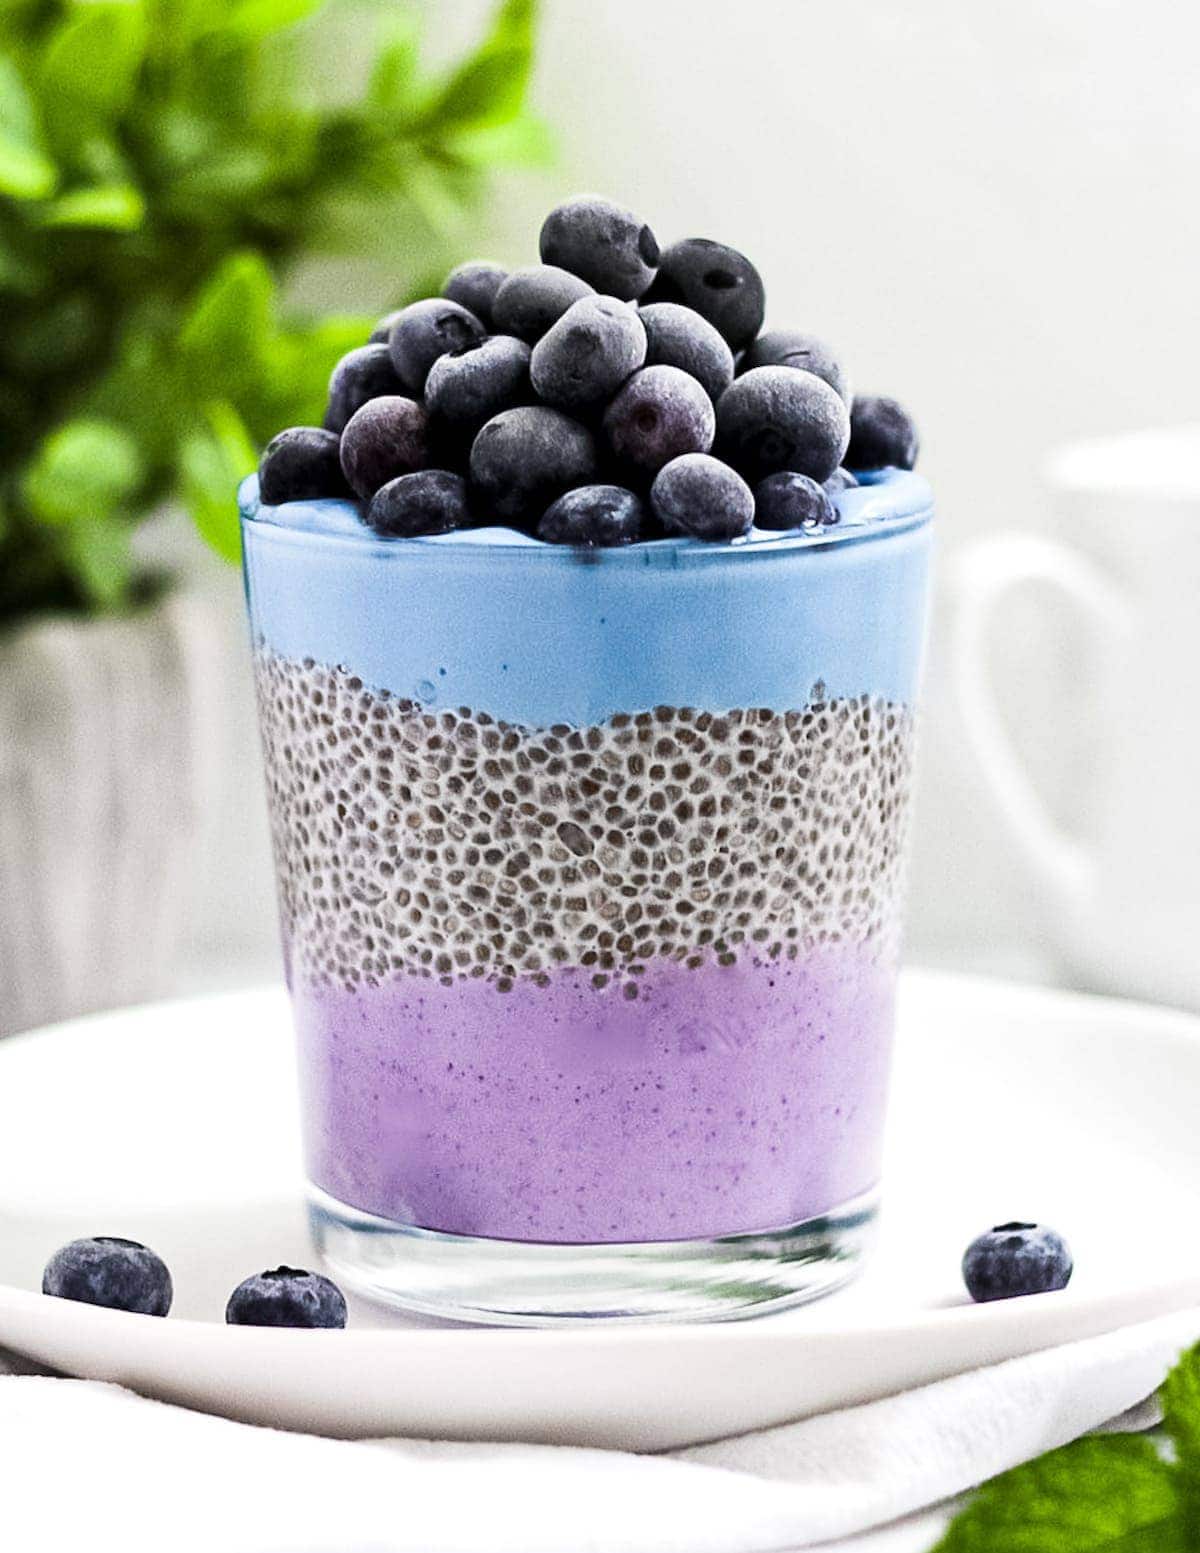 Parfait with plant-based yogurt, chia pudding, and blueberries in a clear glass.